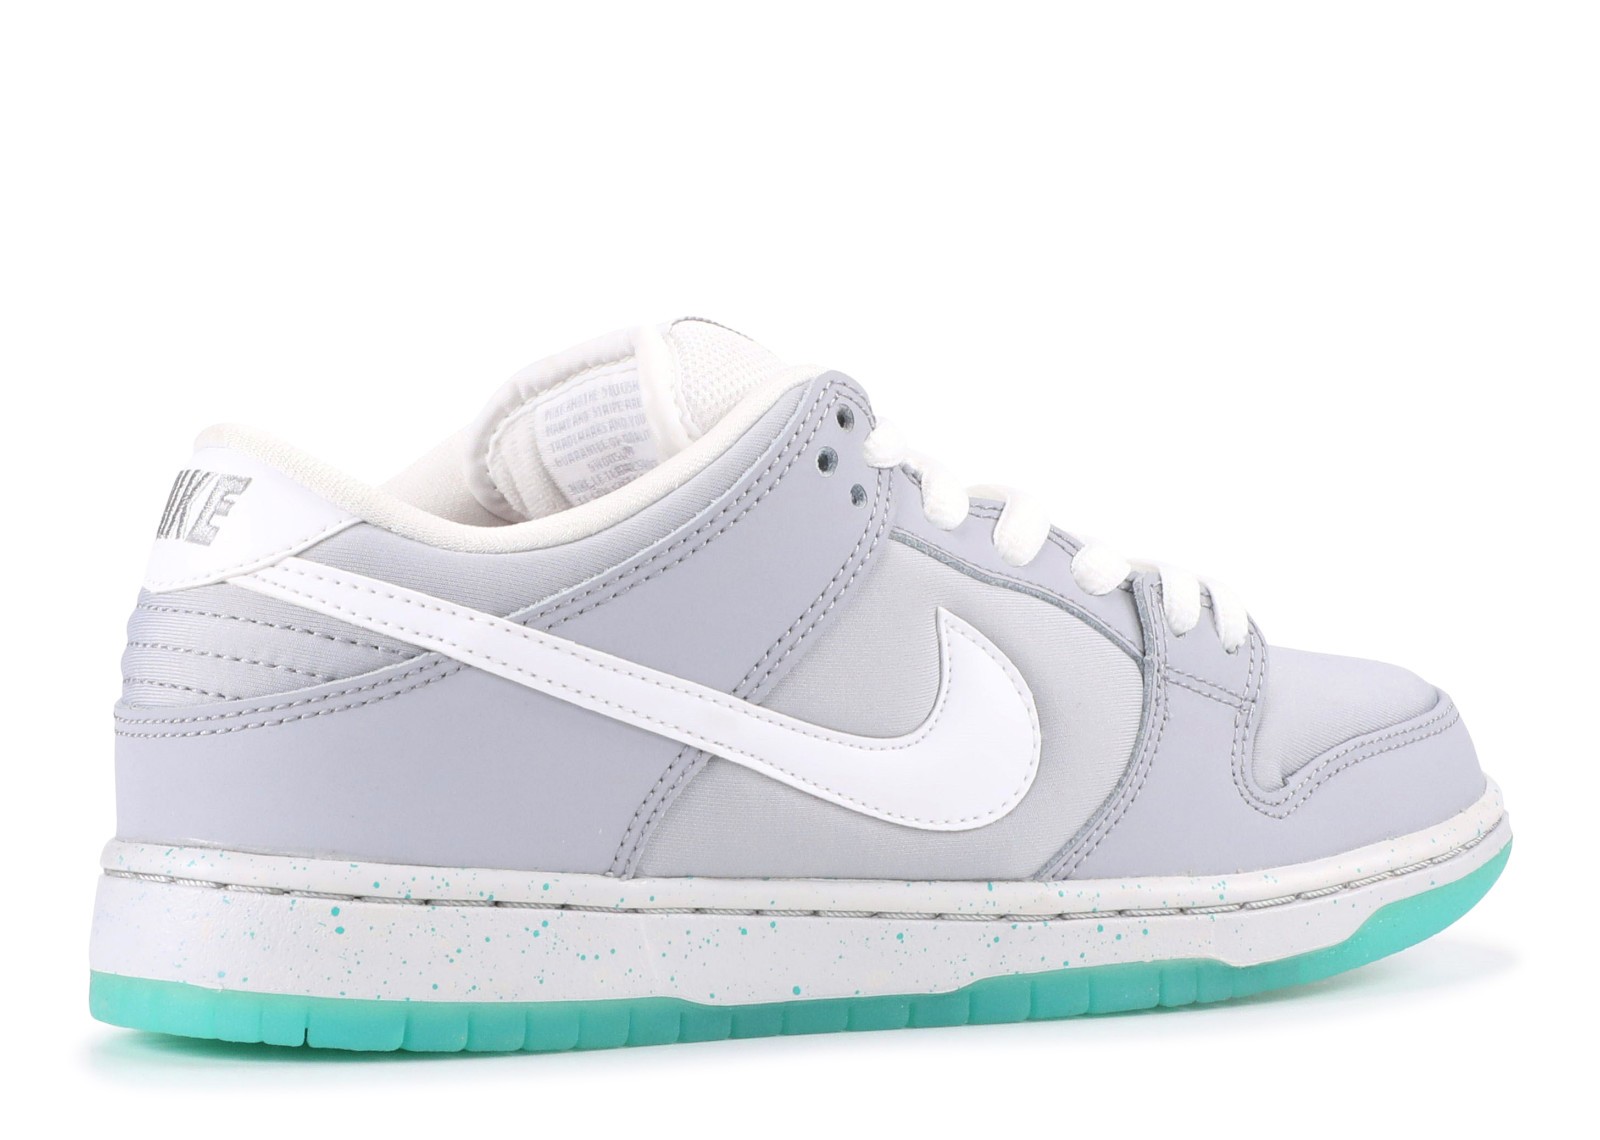 are looking for OG Nike s - GmarShops - Dunk Low Premium SB Marty Mcfly White Light Grey Retro - 022